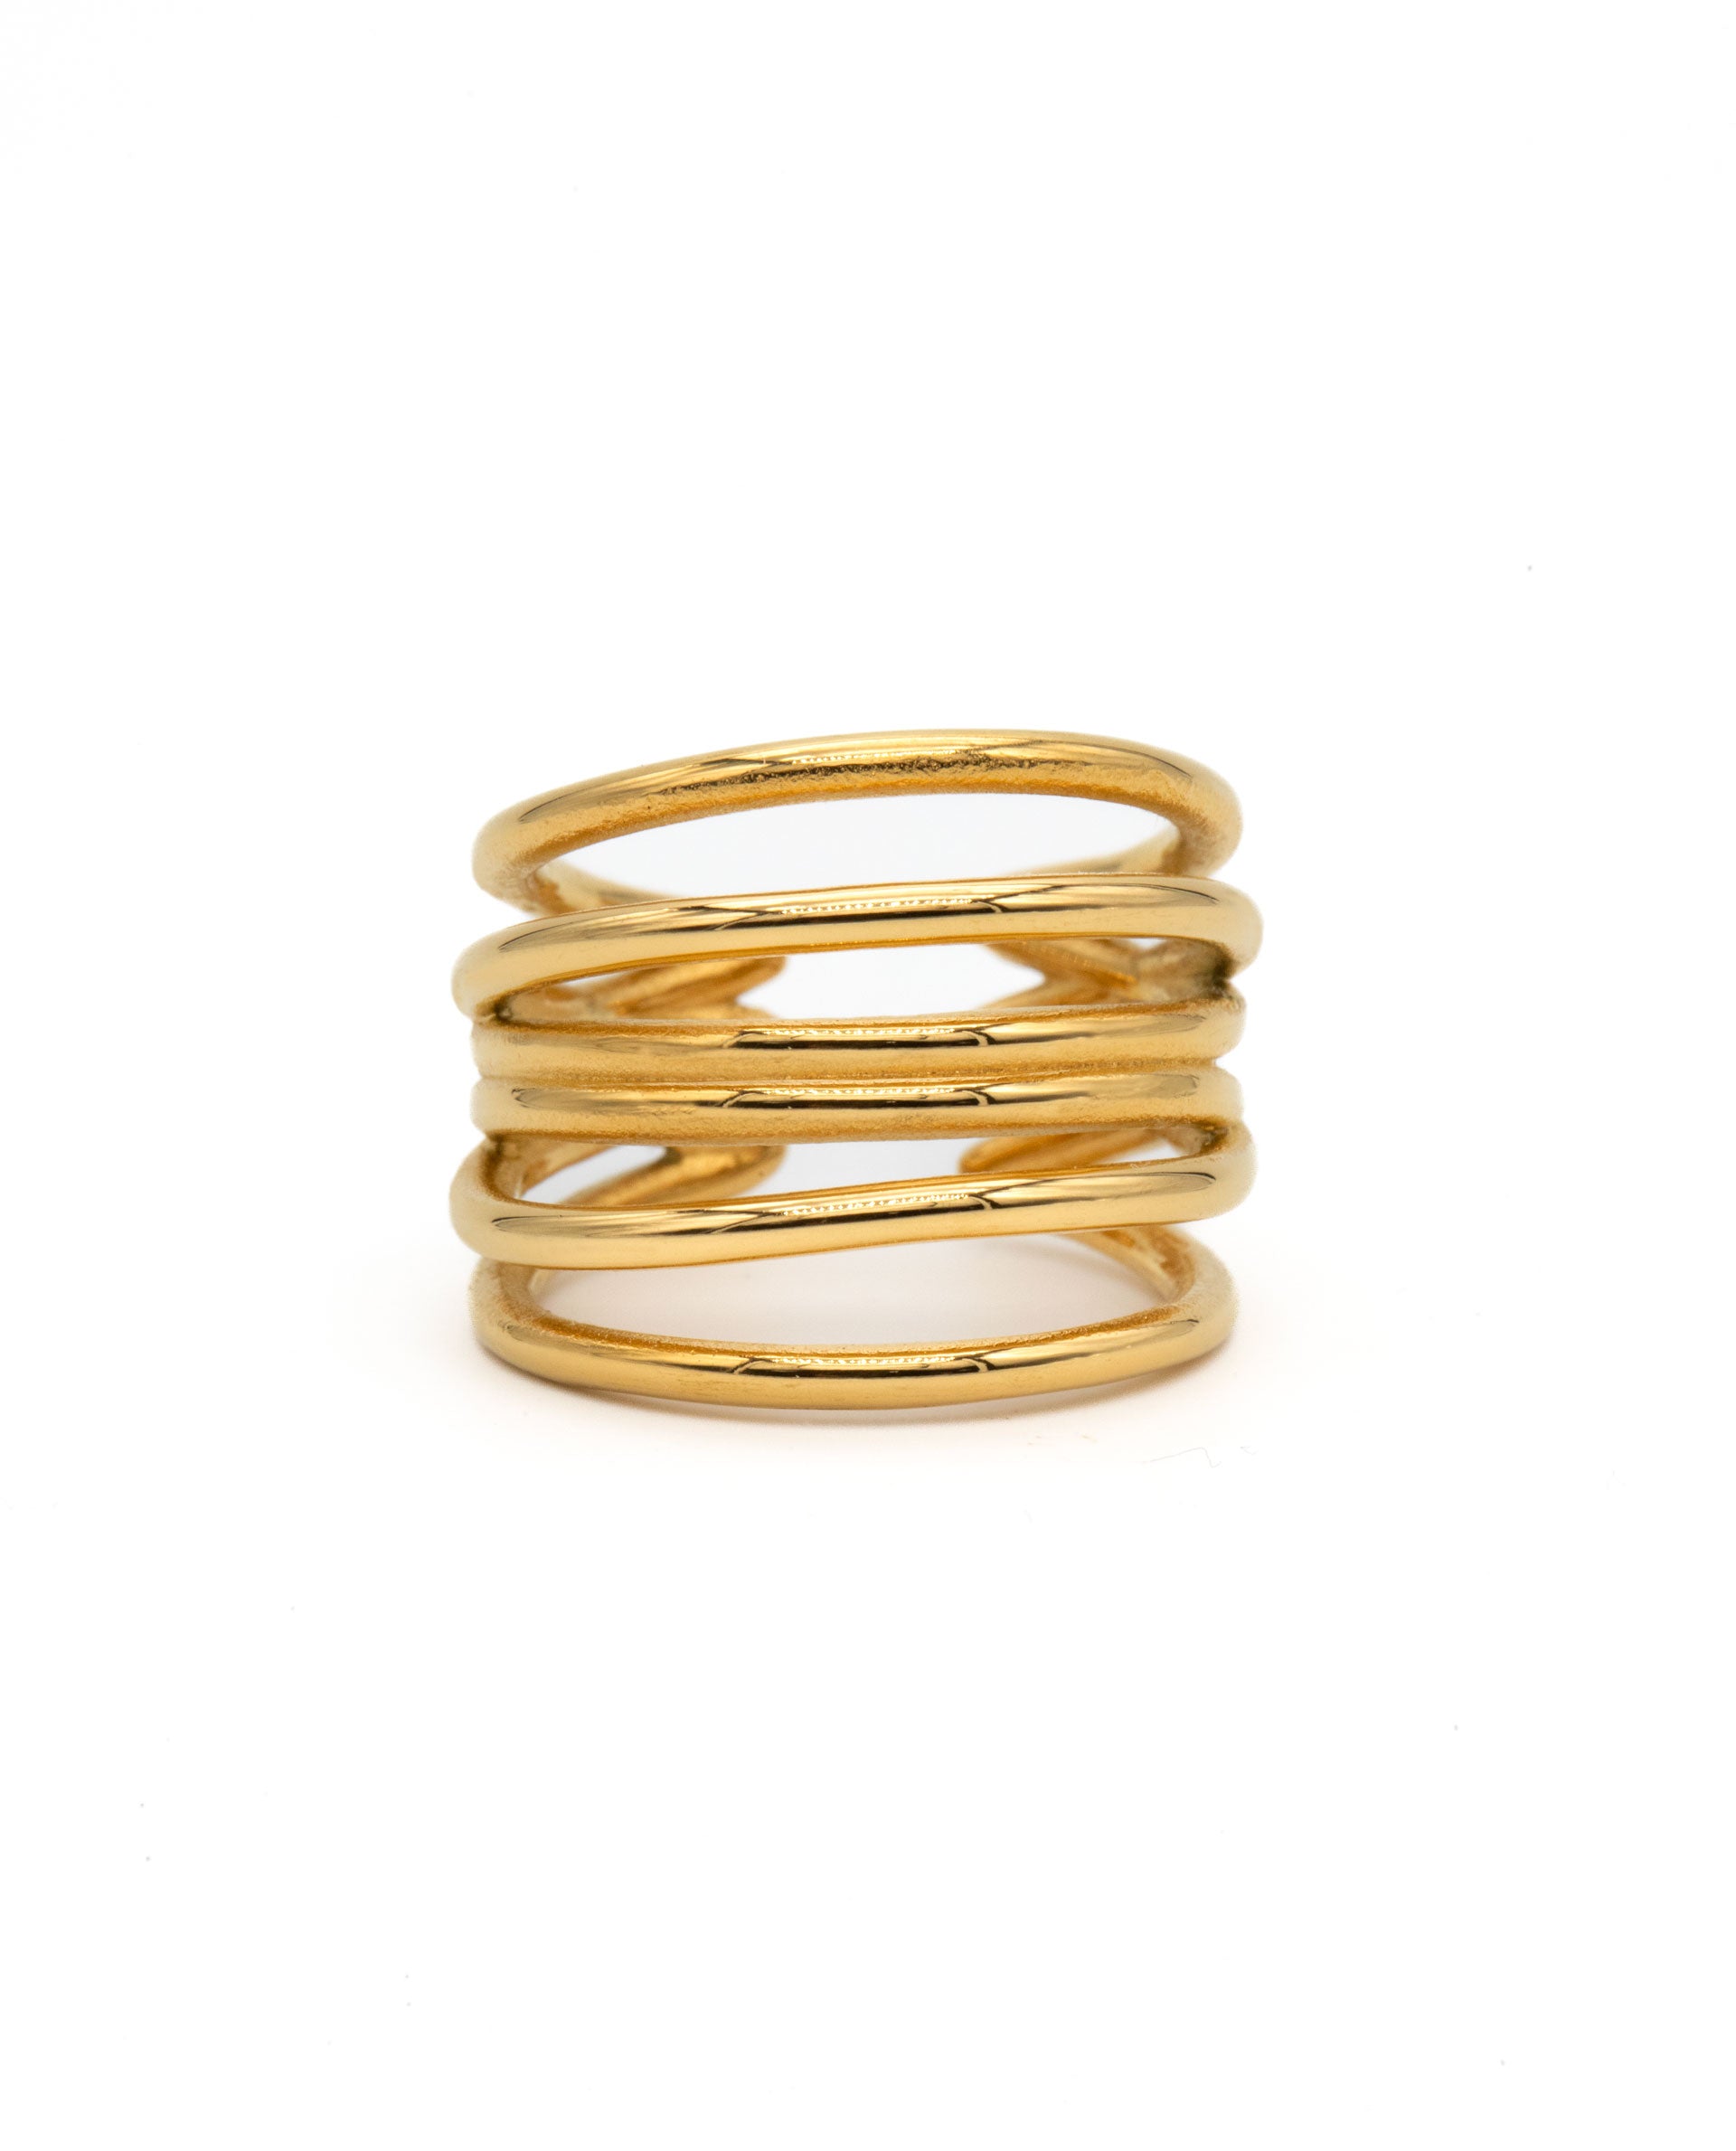 RING STRIPES - STEEL GOLD PLATED